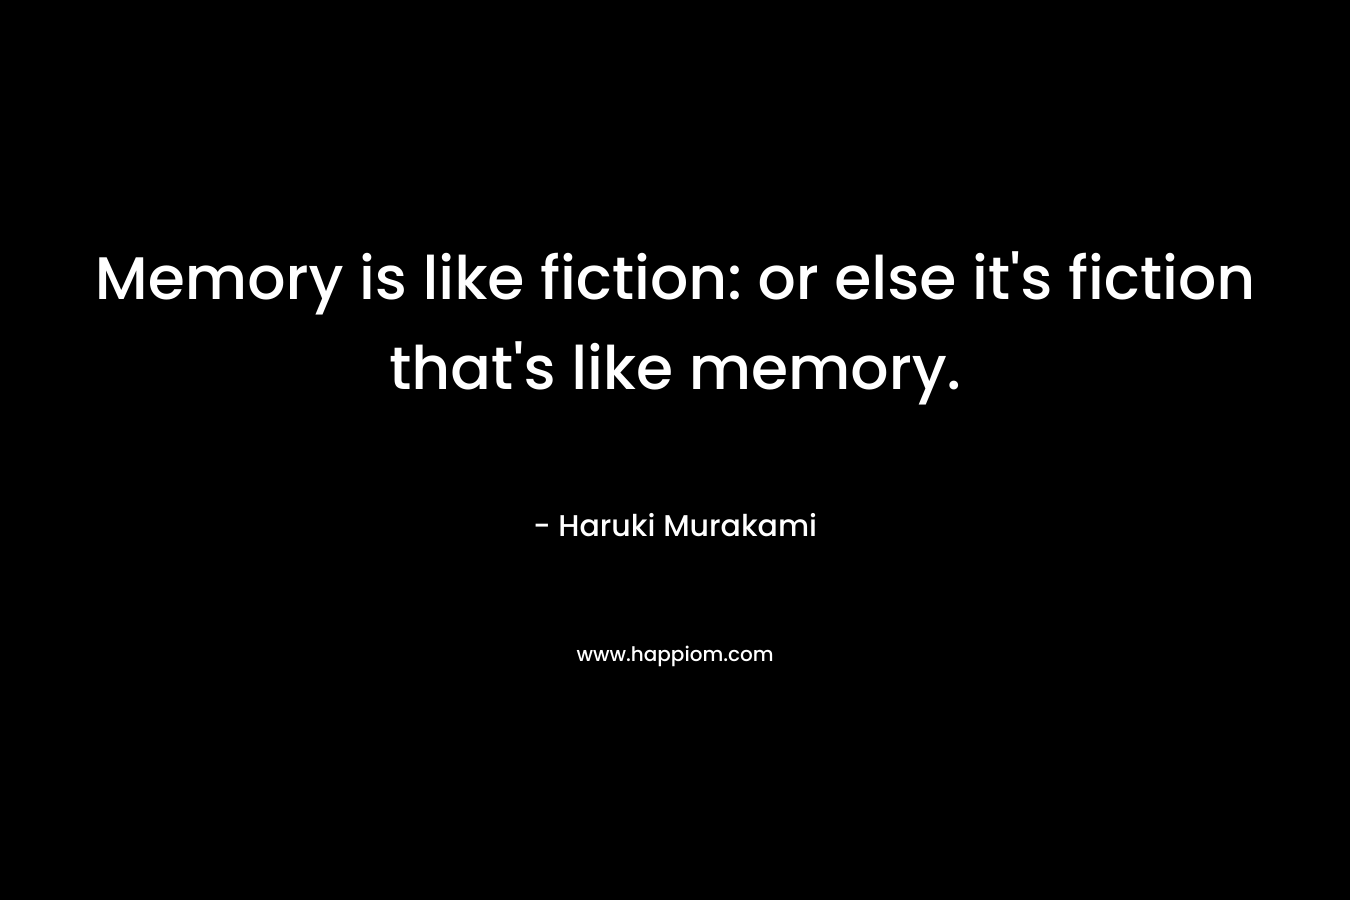 Memory is like fiction: or else it's fiction that's like memory.